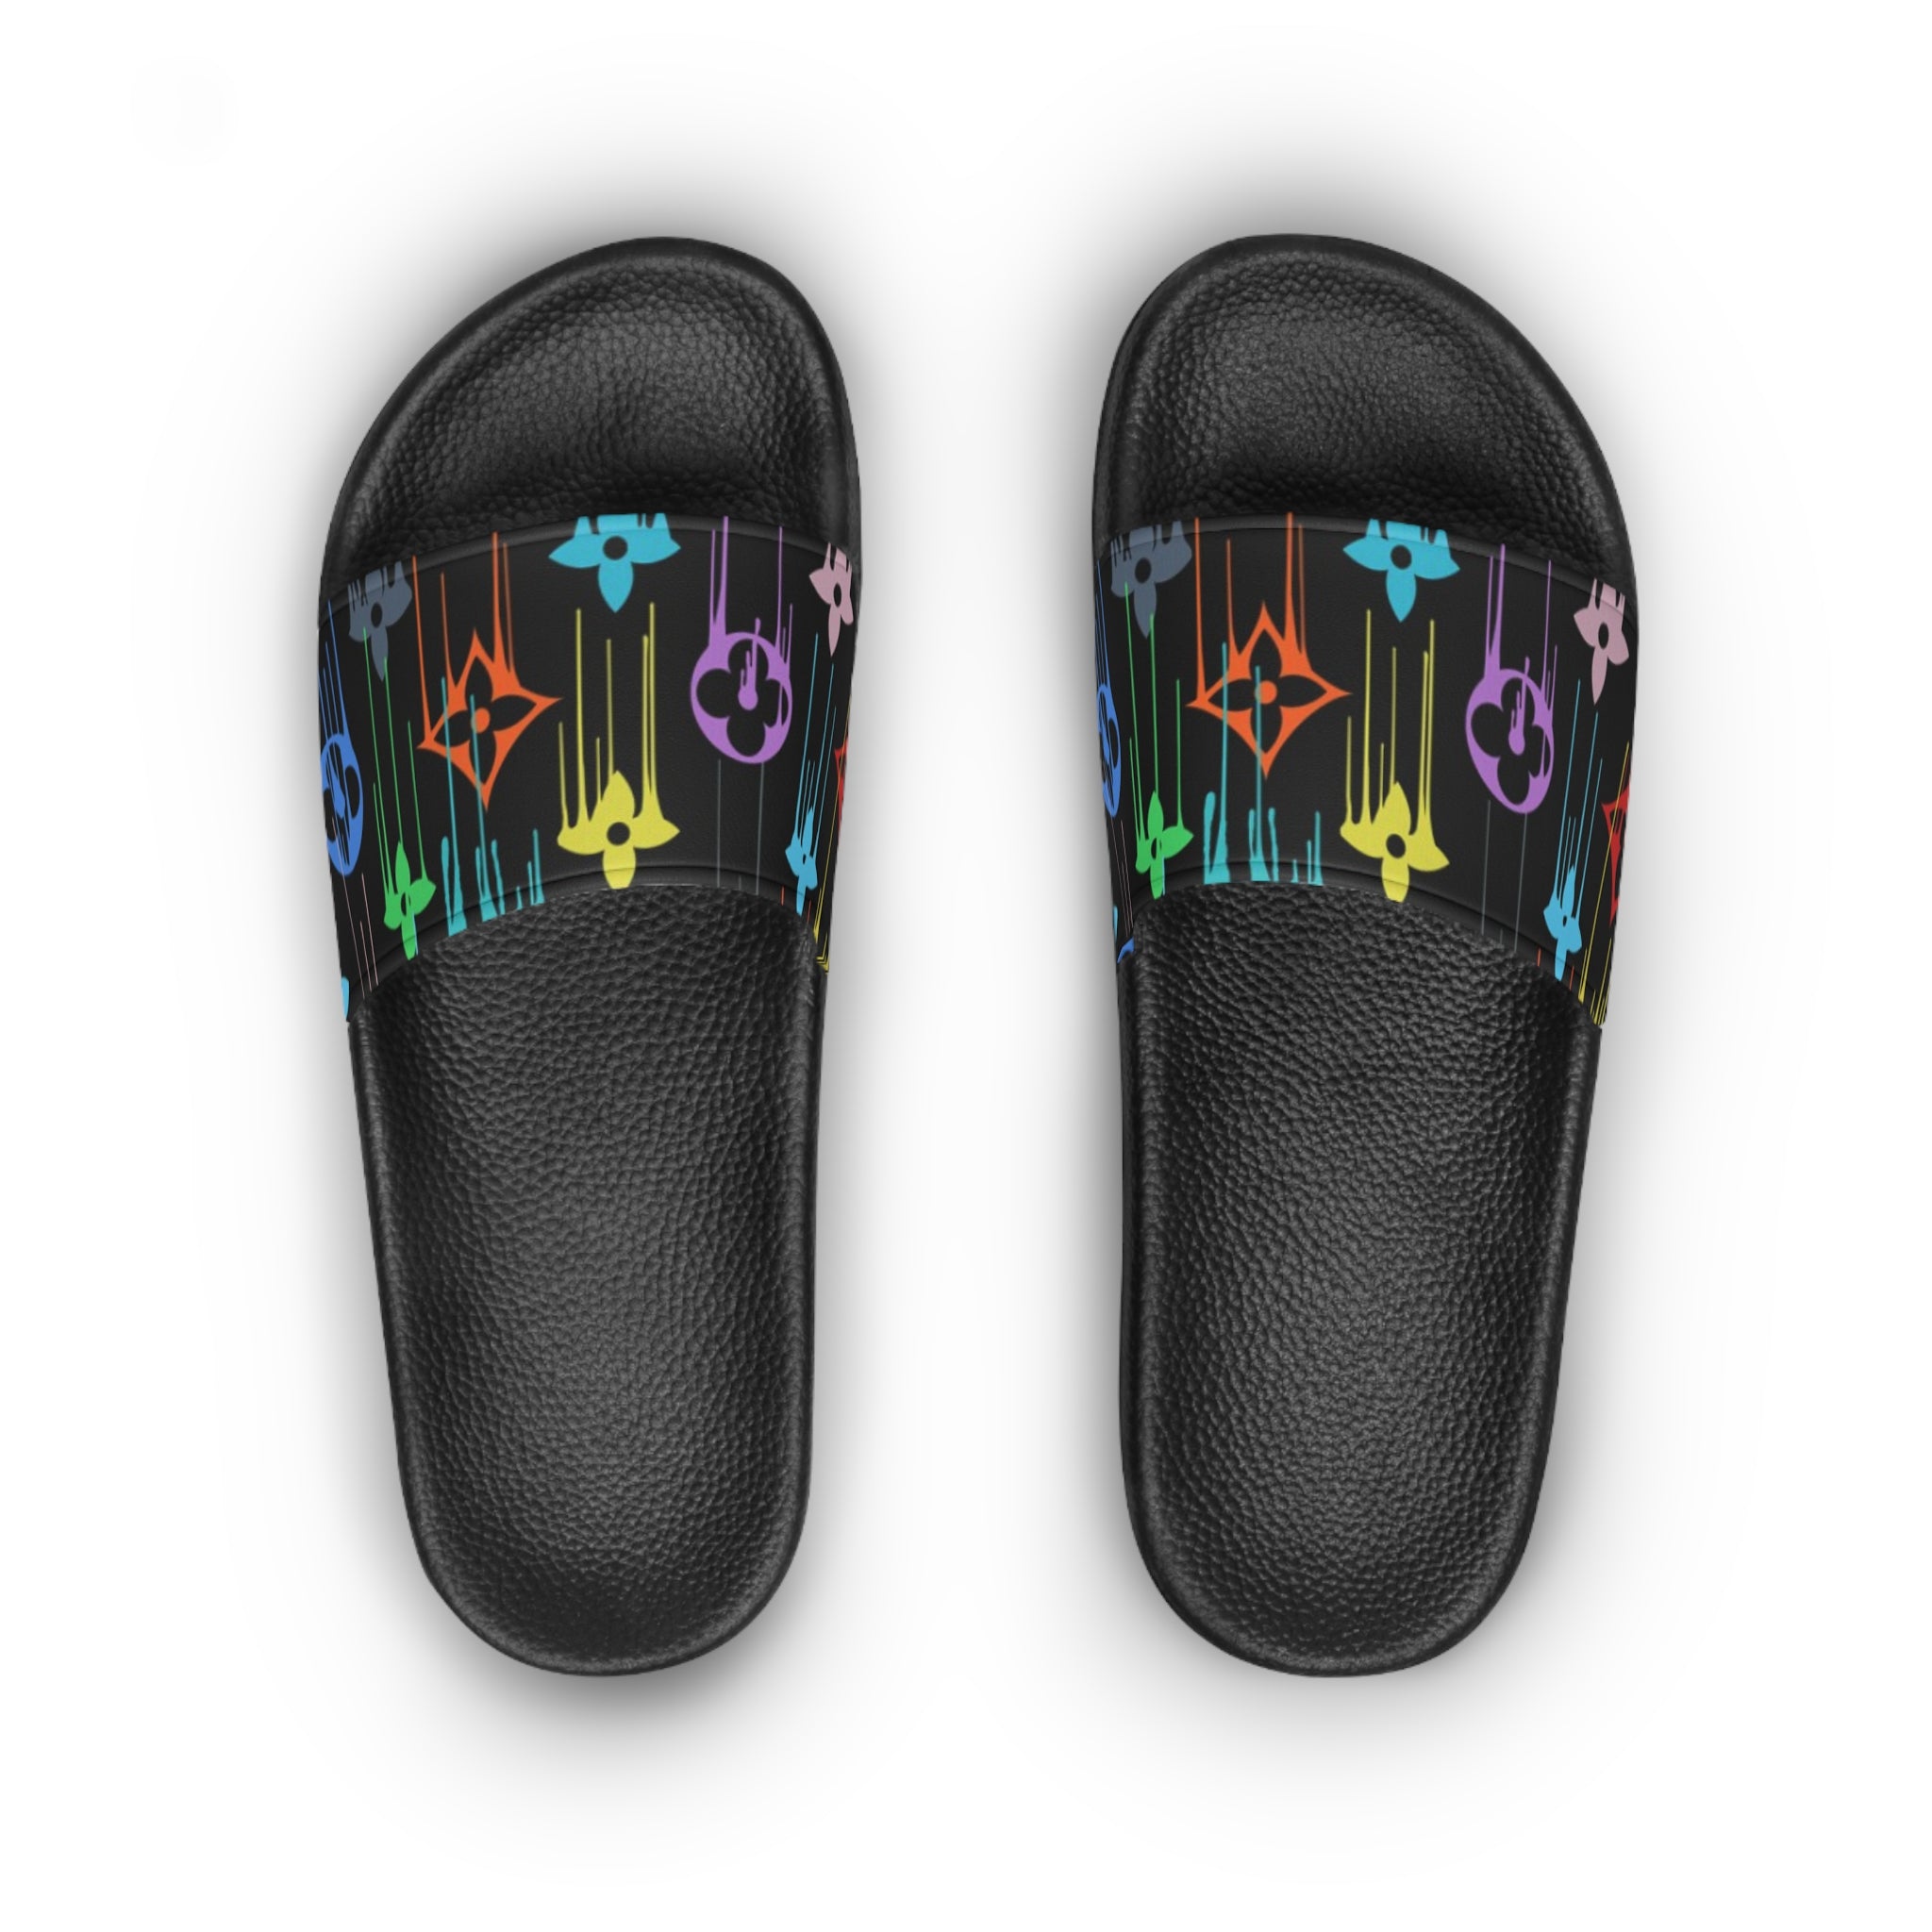  Casual Wear Collection in Multi-Color Dripping Icons Women's Slide Sandals, Slide Sandals for Women, Plaid Slip Ons SandalsBlacksoleUS8